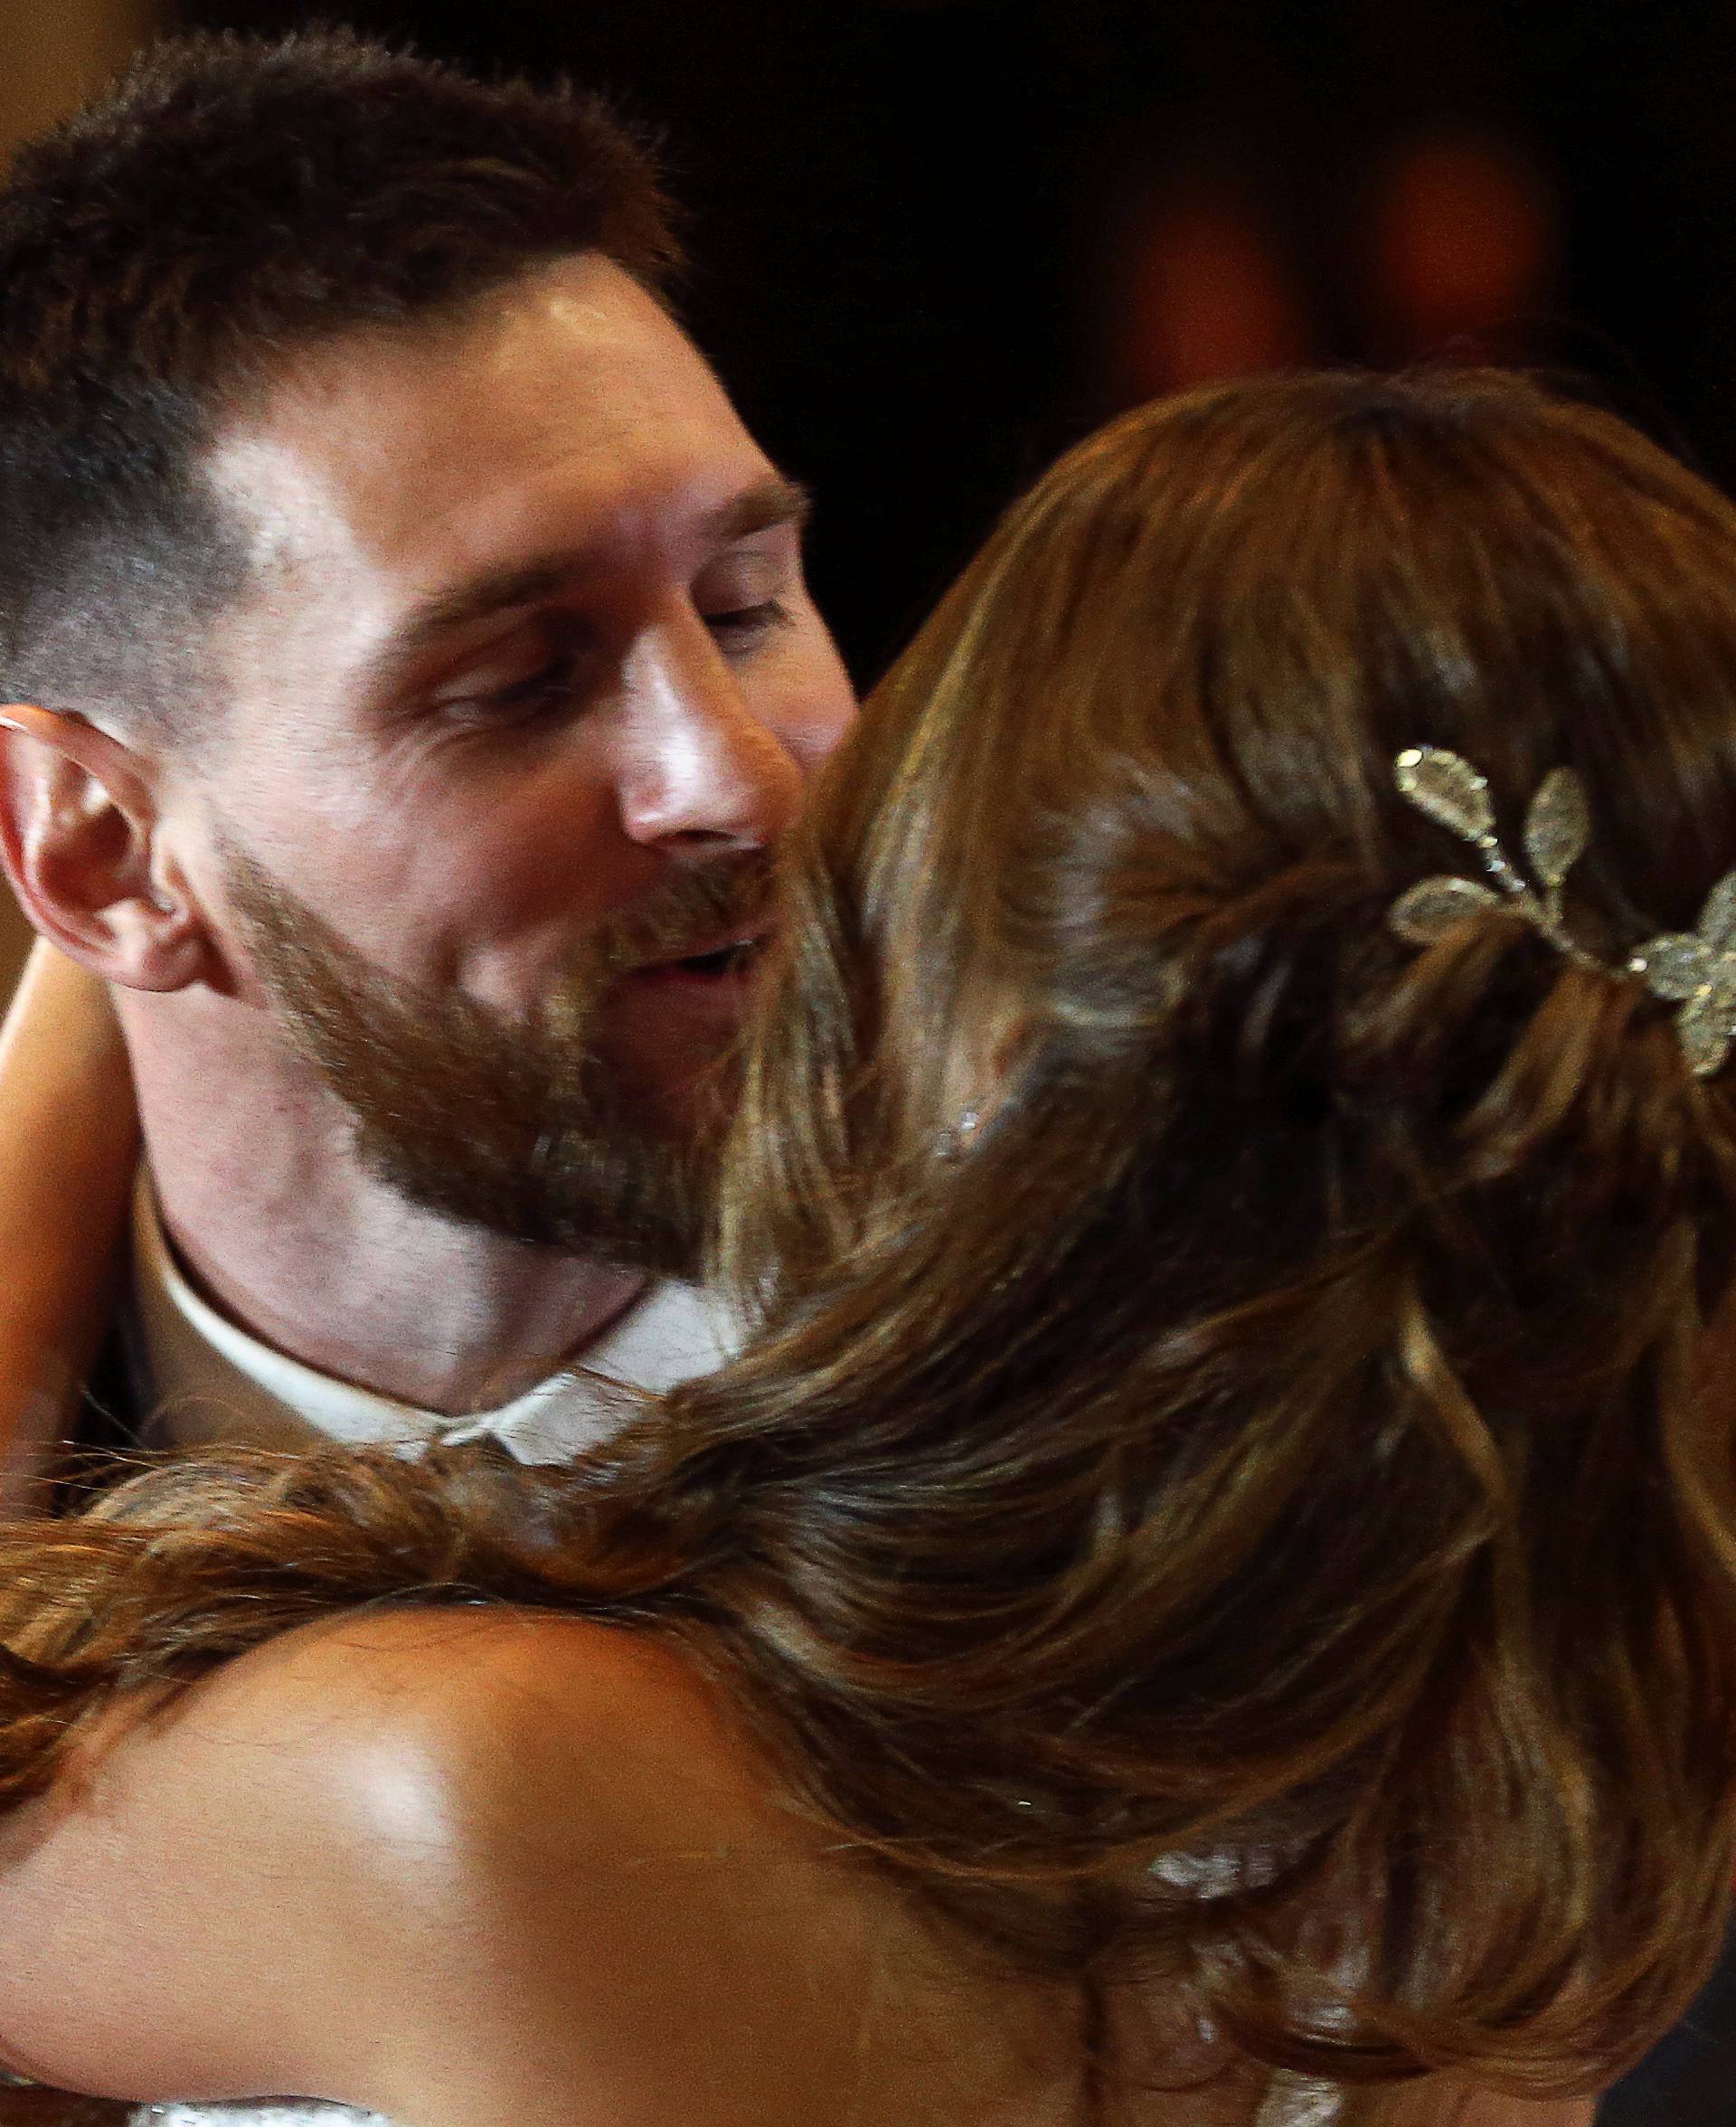 Argentine soccer player Lionel Messi and his wife Antonela Roccuzzo kiss as they pose at their wedding in Rosario, Argentina